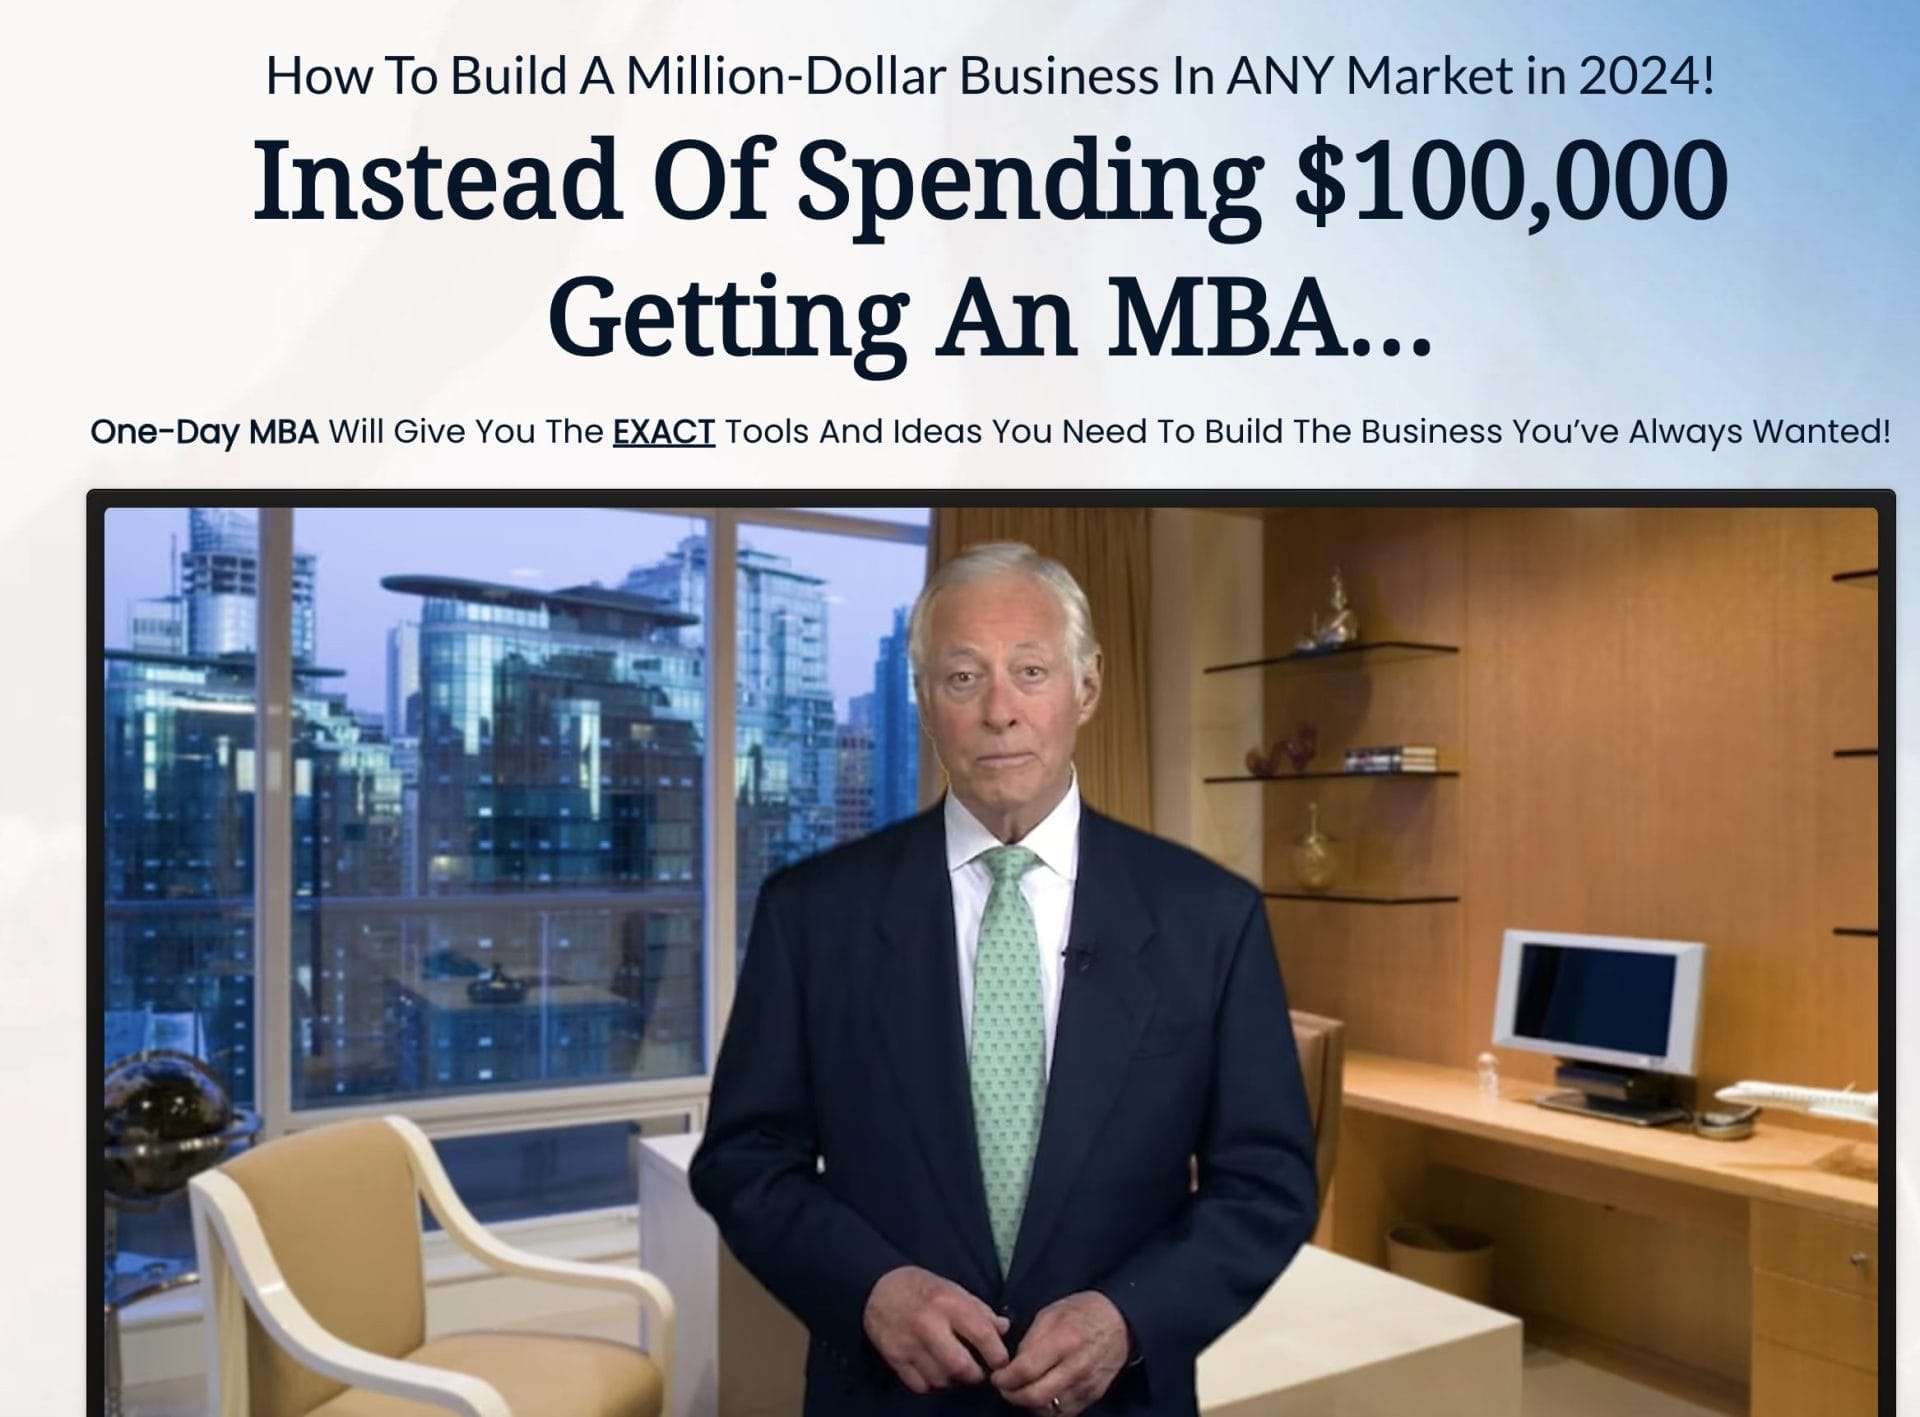 Brian Tracy – One-Day MBA How To Build A Million-Dollar Business 2024